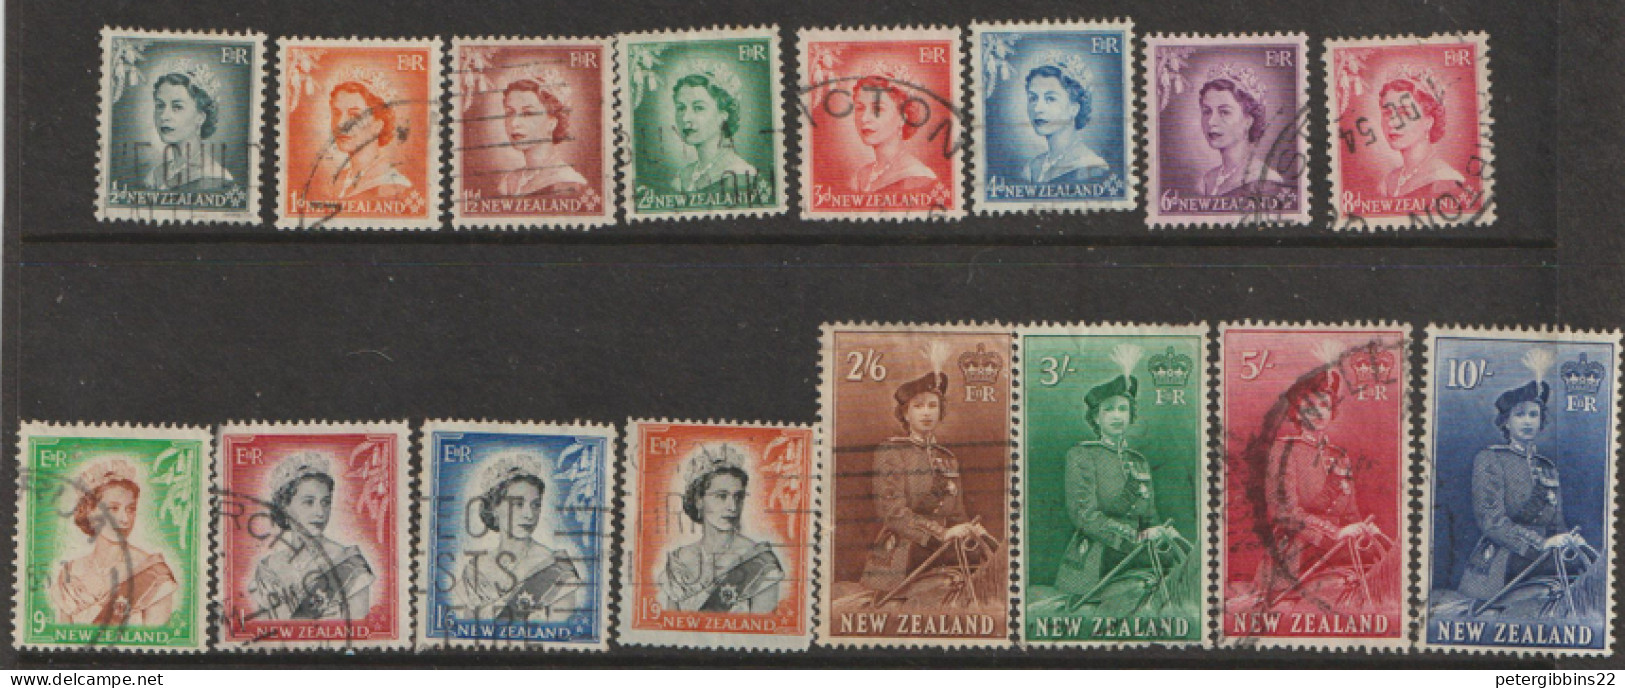 New  Zealand  1953  SG 723-36  Definitibes     Fine Used   - Used Stamps